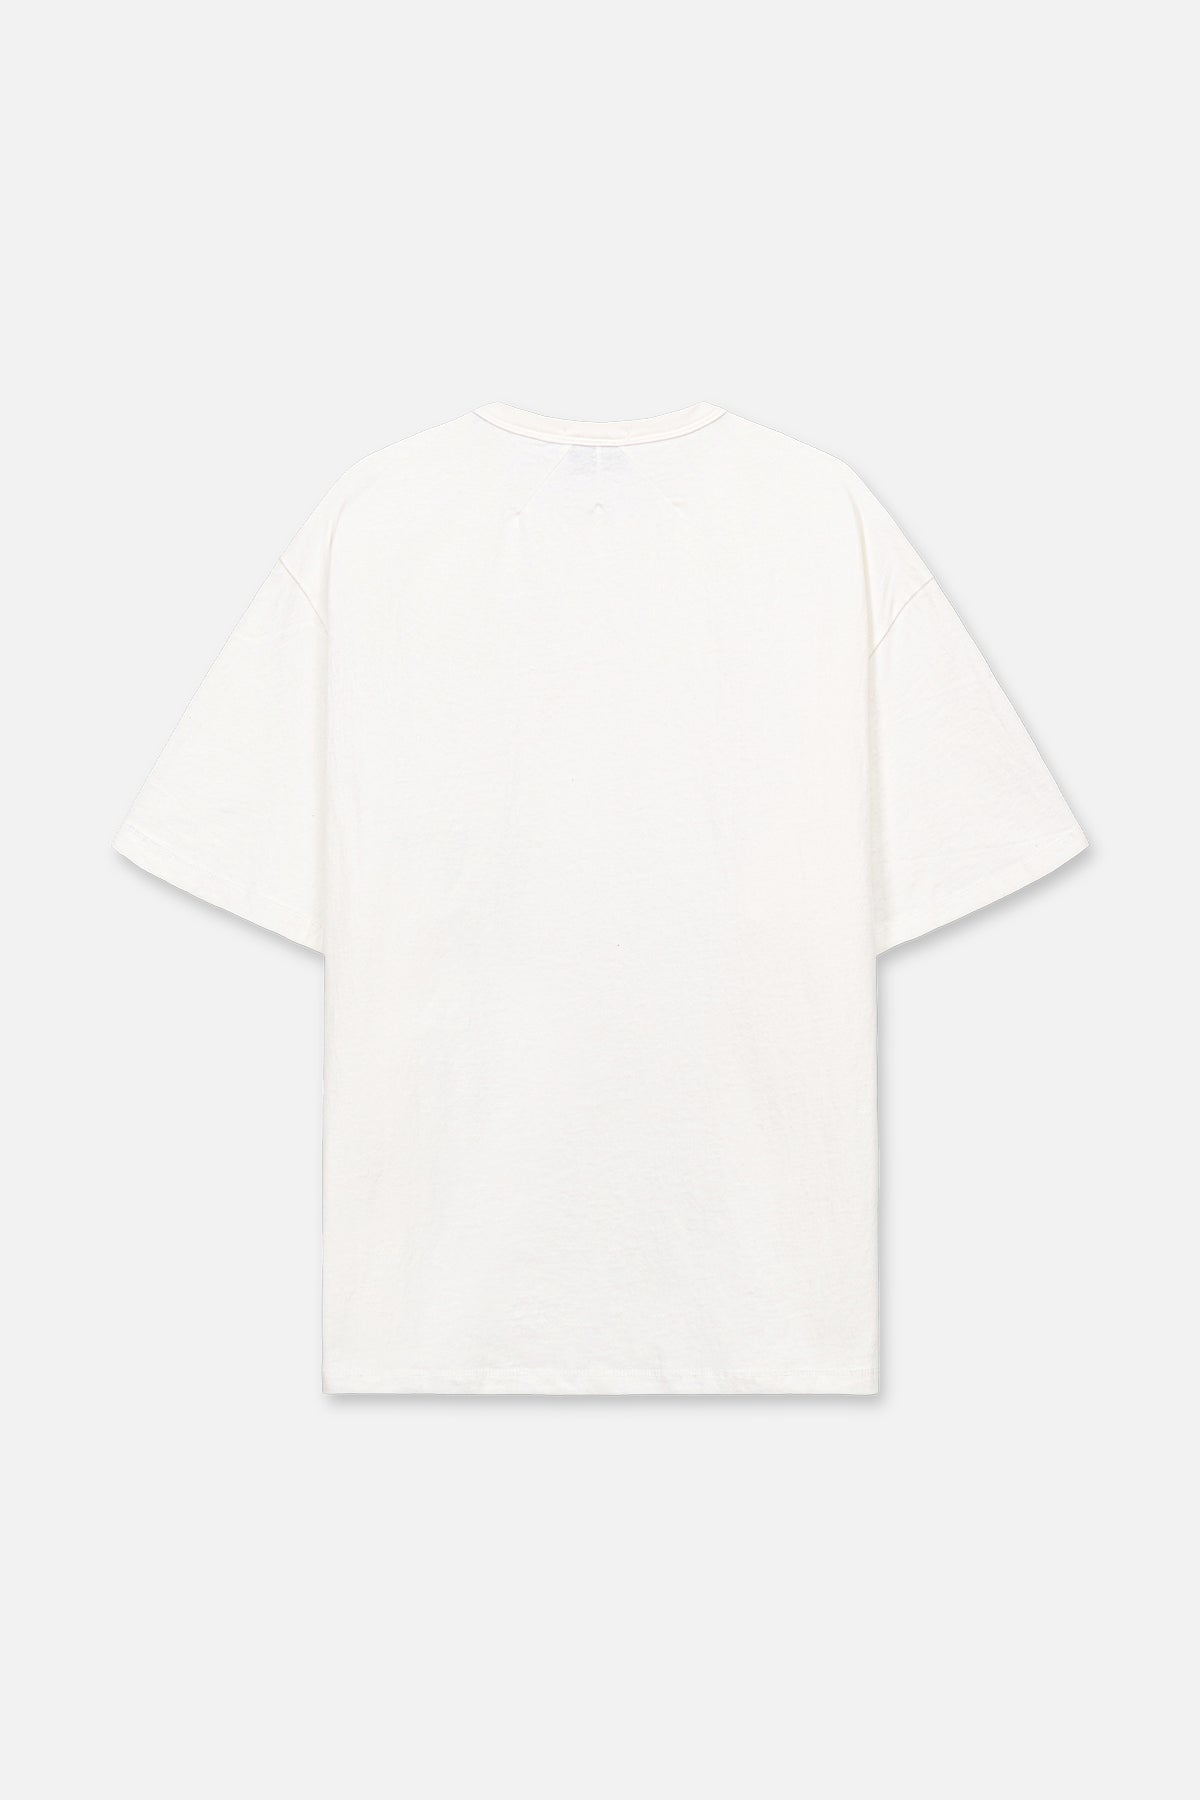 COLIN OVERSIZED TEE | WHITE